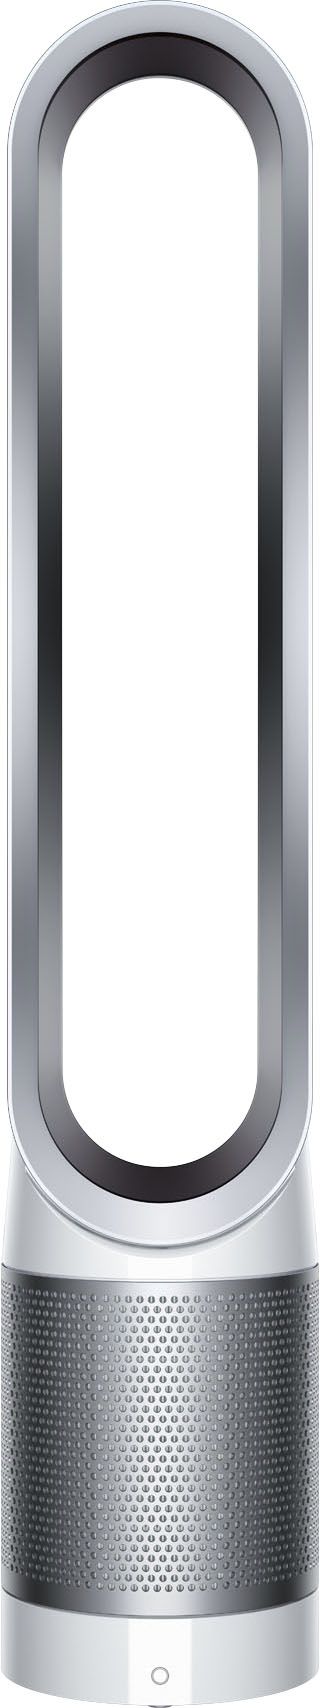 Dyson TP01 Pure Cool Tower 800 Sq. Ft. HEPA Air Purifier and Fan White/Silver 308247-01 - Best Bu... | Best Buy U.S.